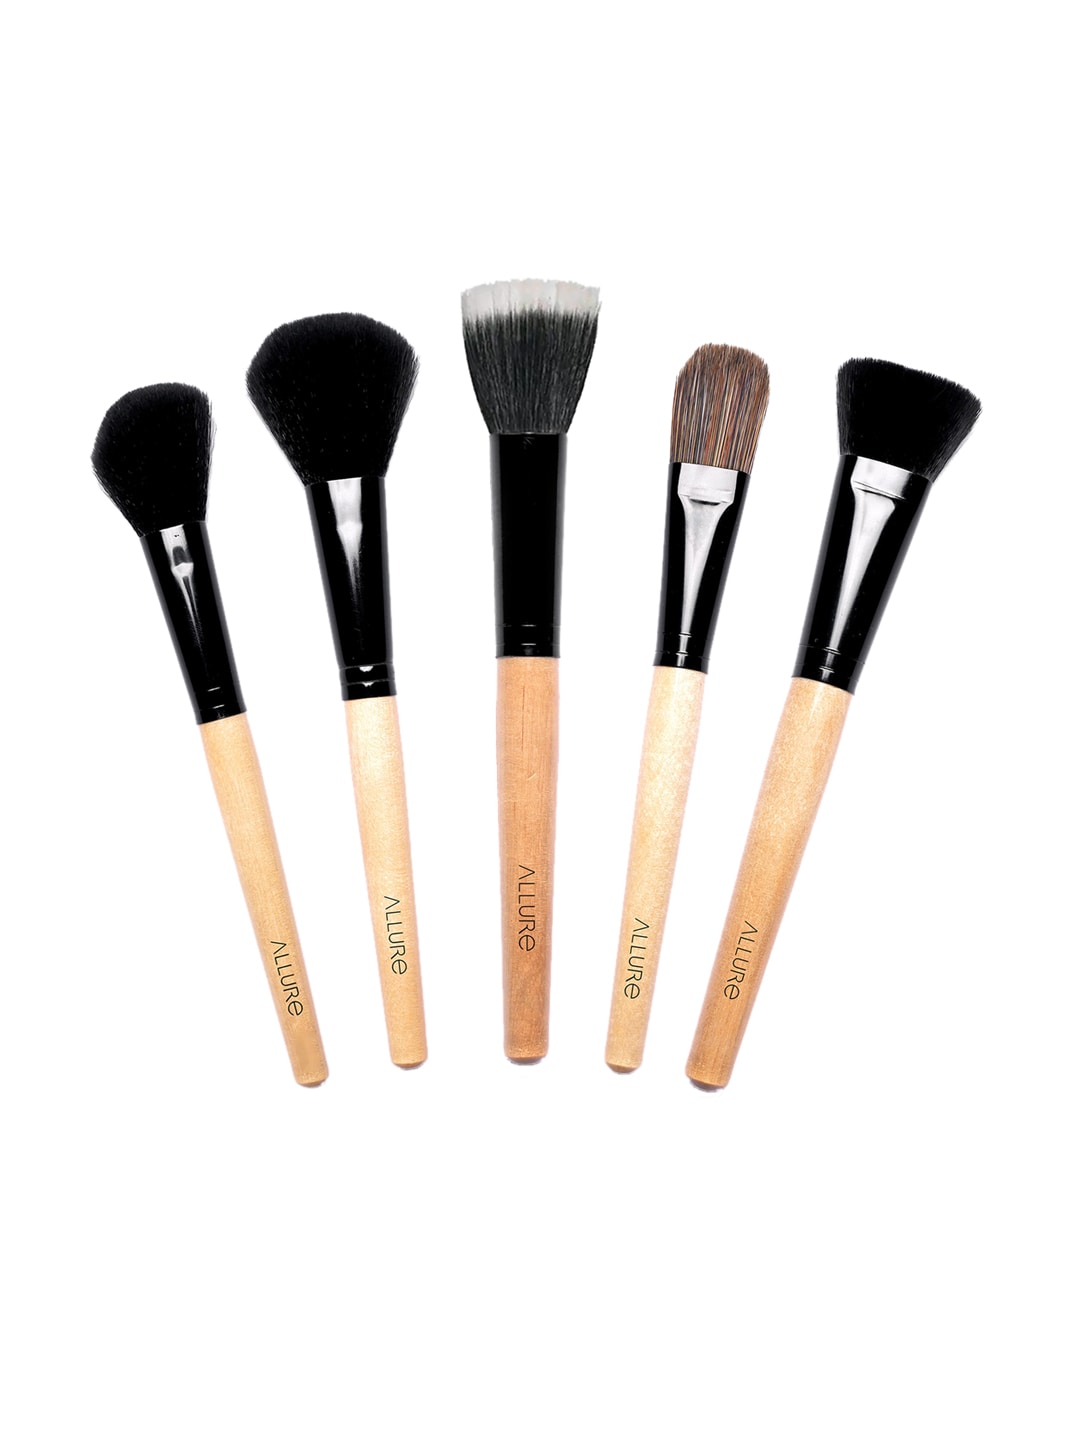 ALLURE Set of 5 Wooden Face Makeup Brushes ACKF1-05 Price in India